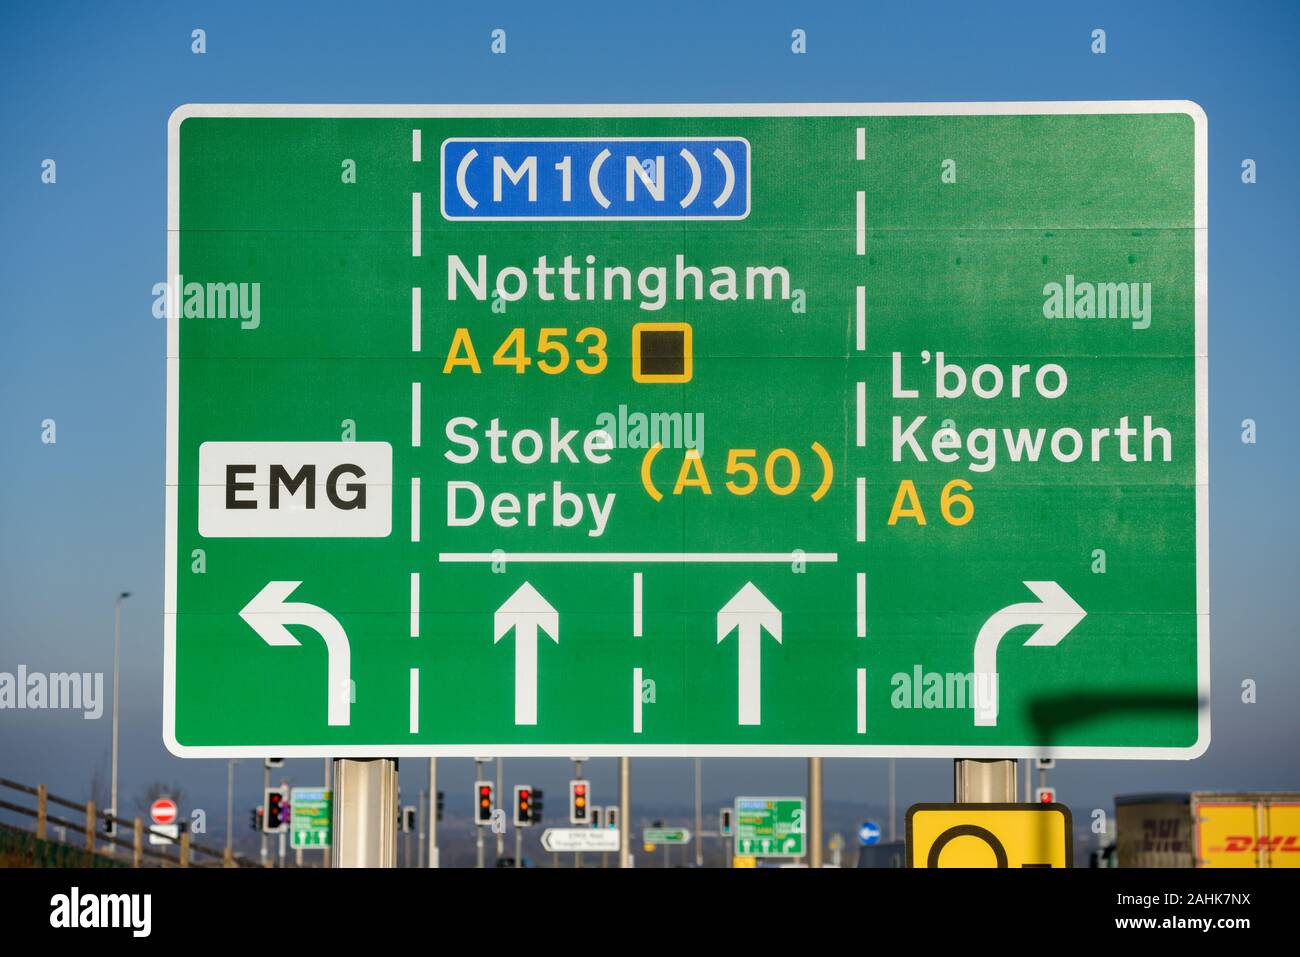 Traffic Road Signs Junction 24 of the M1 Motorway Leicestershire, UK. Stock Photo